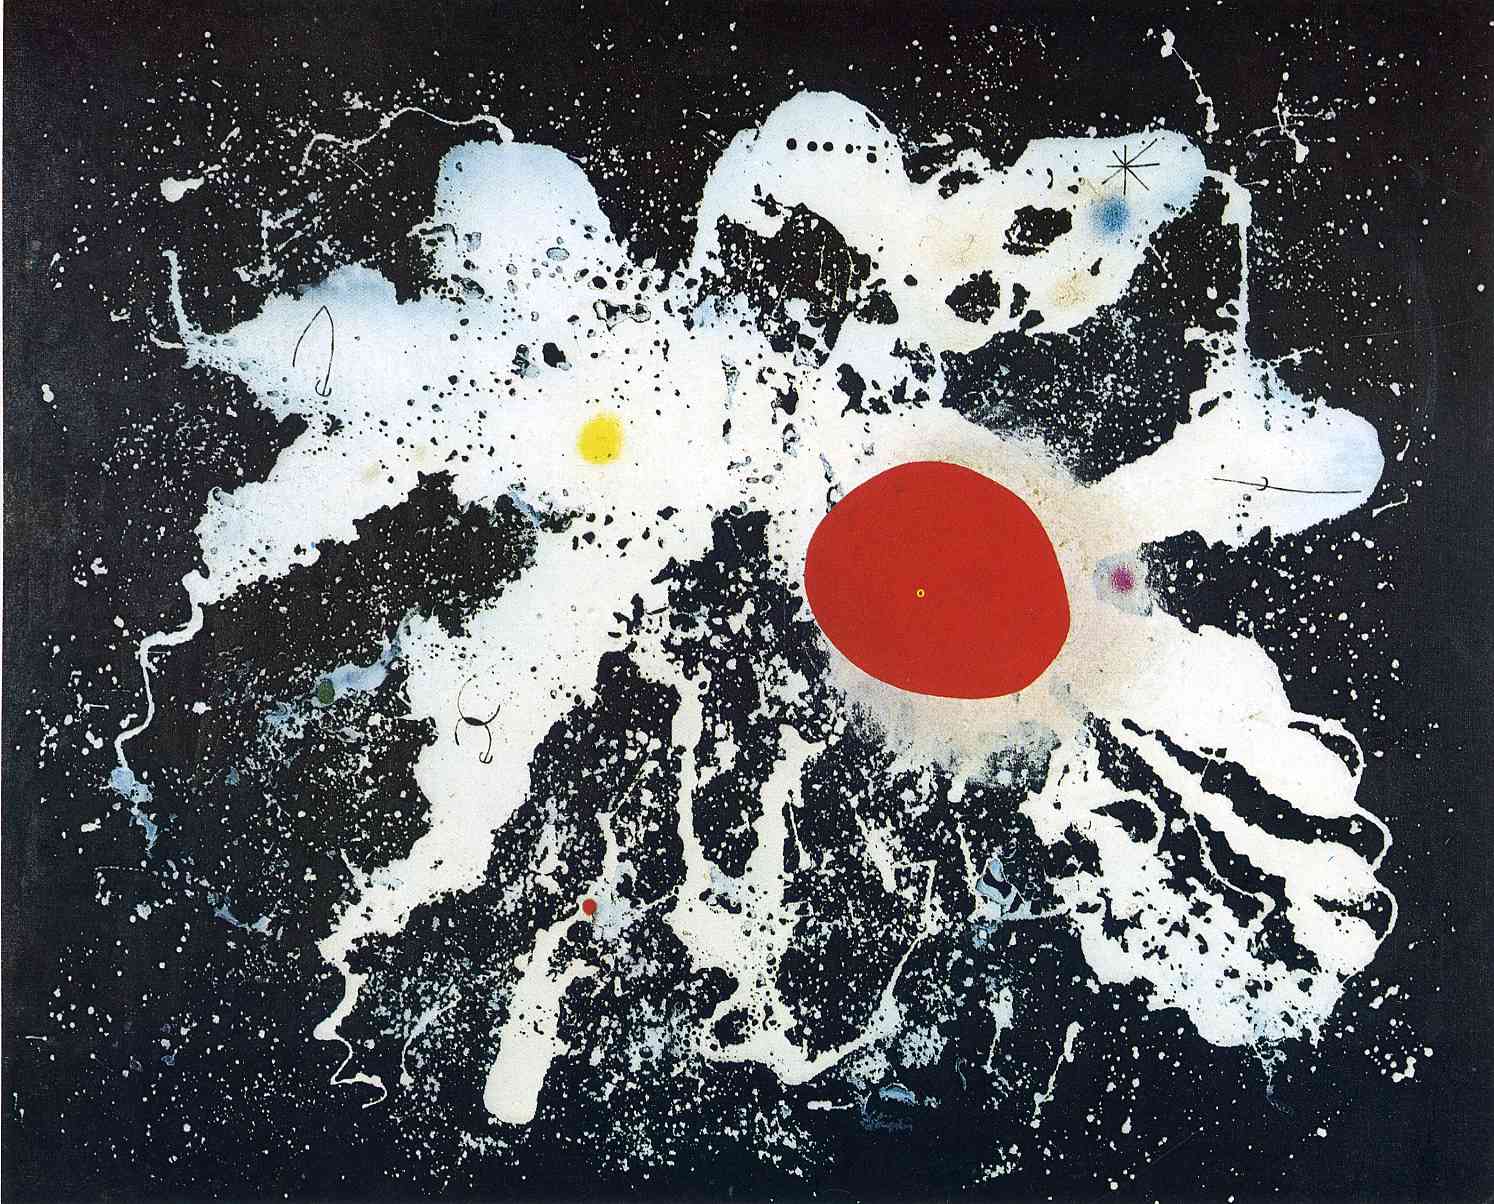 Joan Miro - The Red Disk